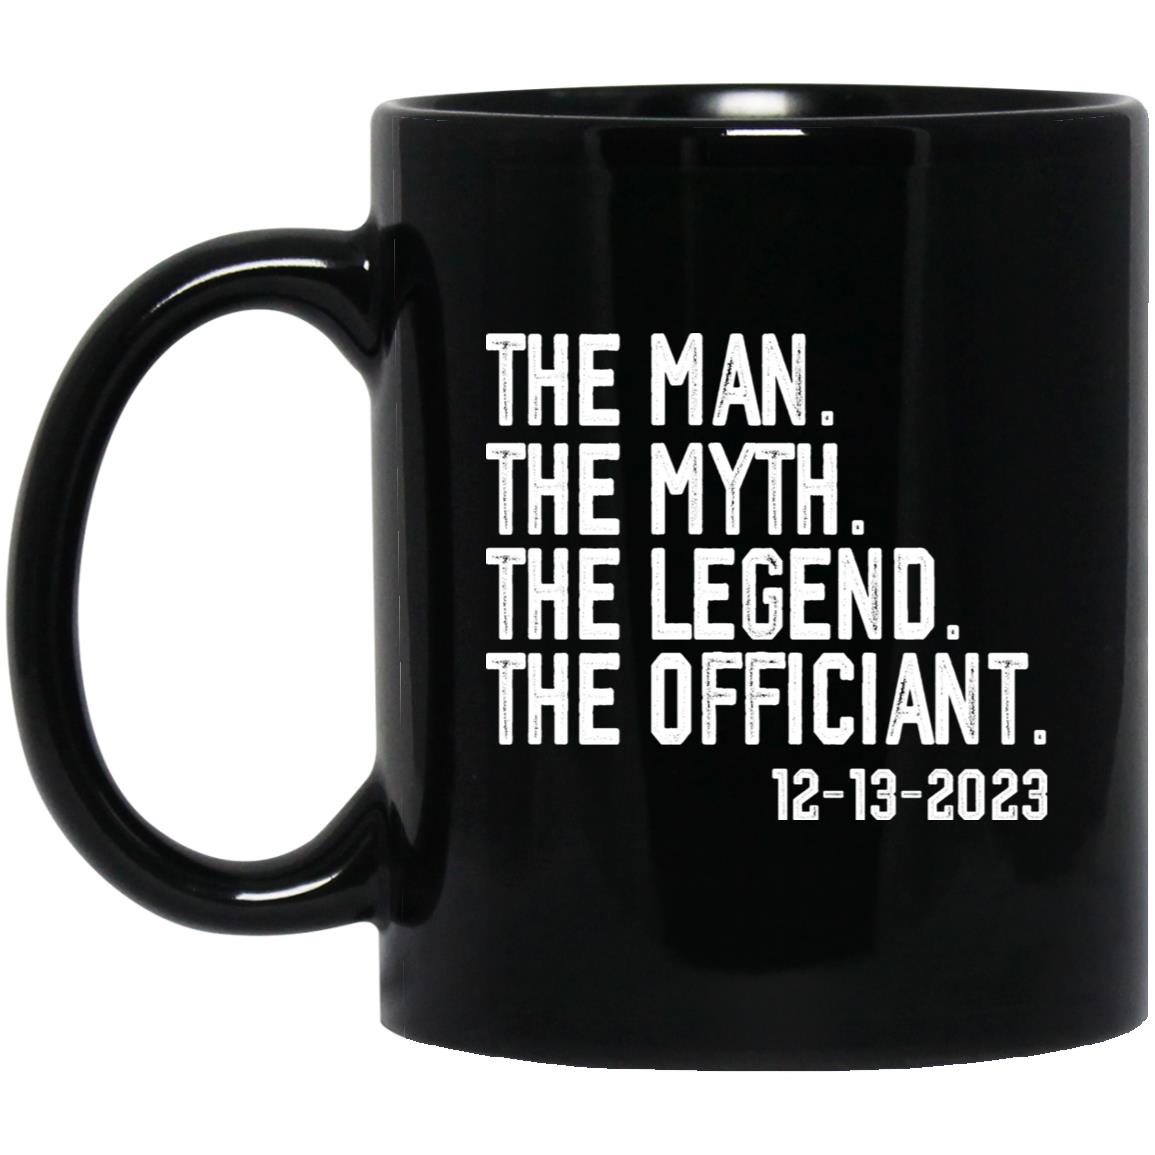 Personalized Wedding Gift Mug for Officiant The Man Myth Legend